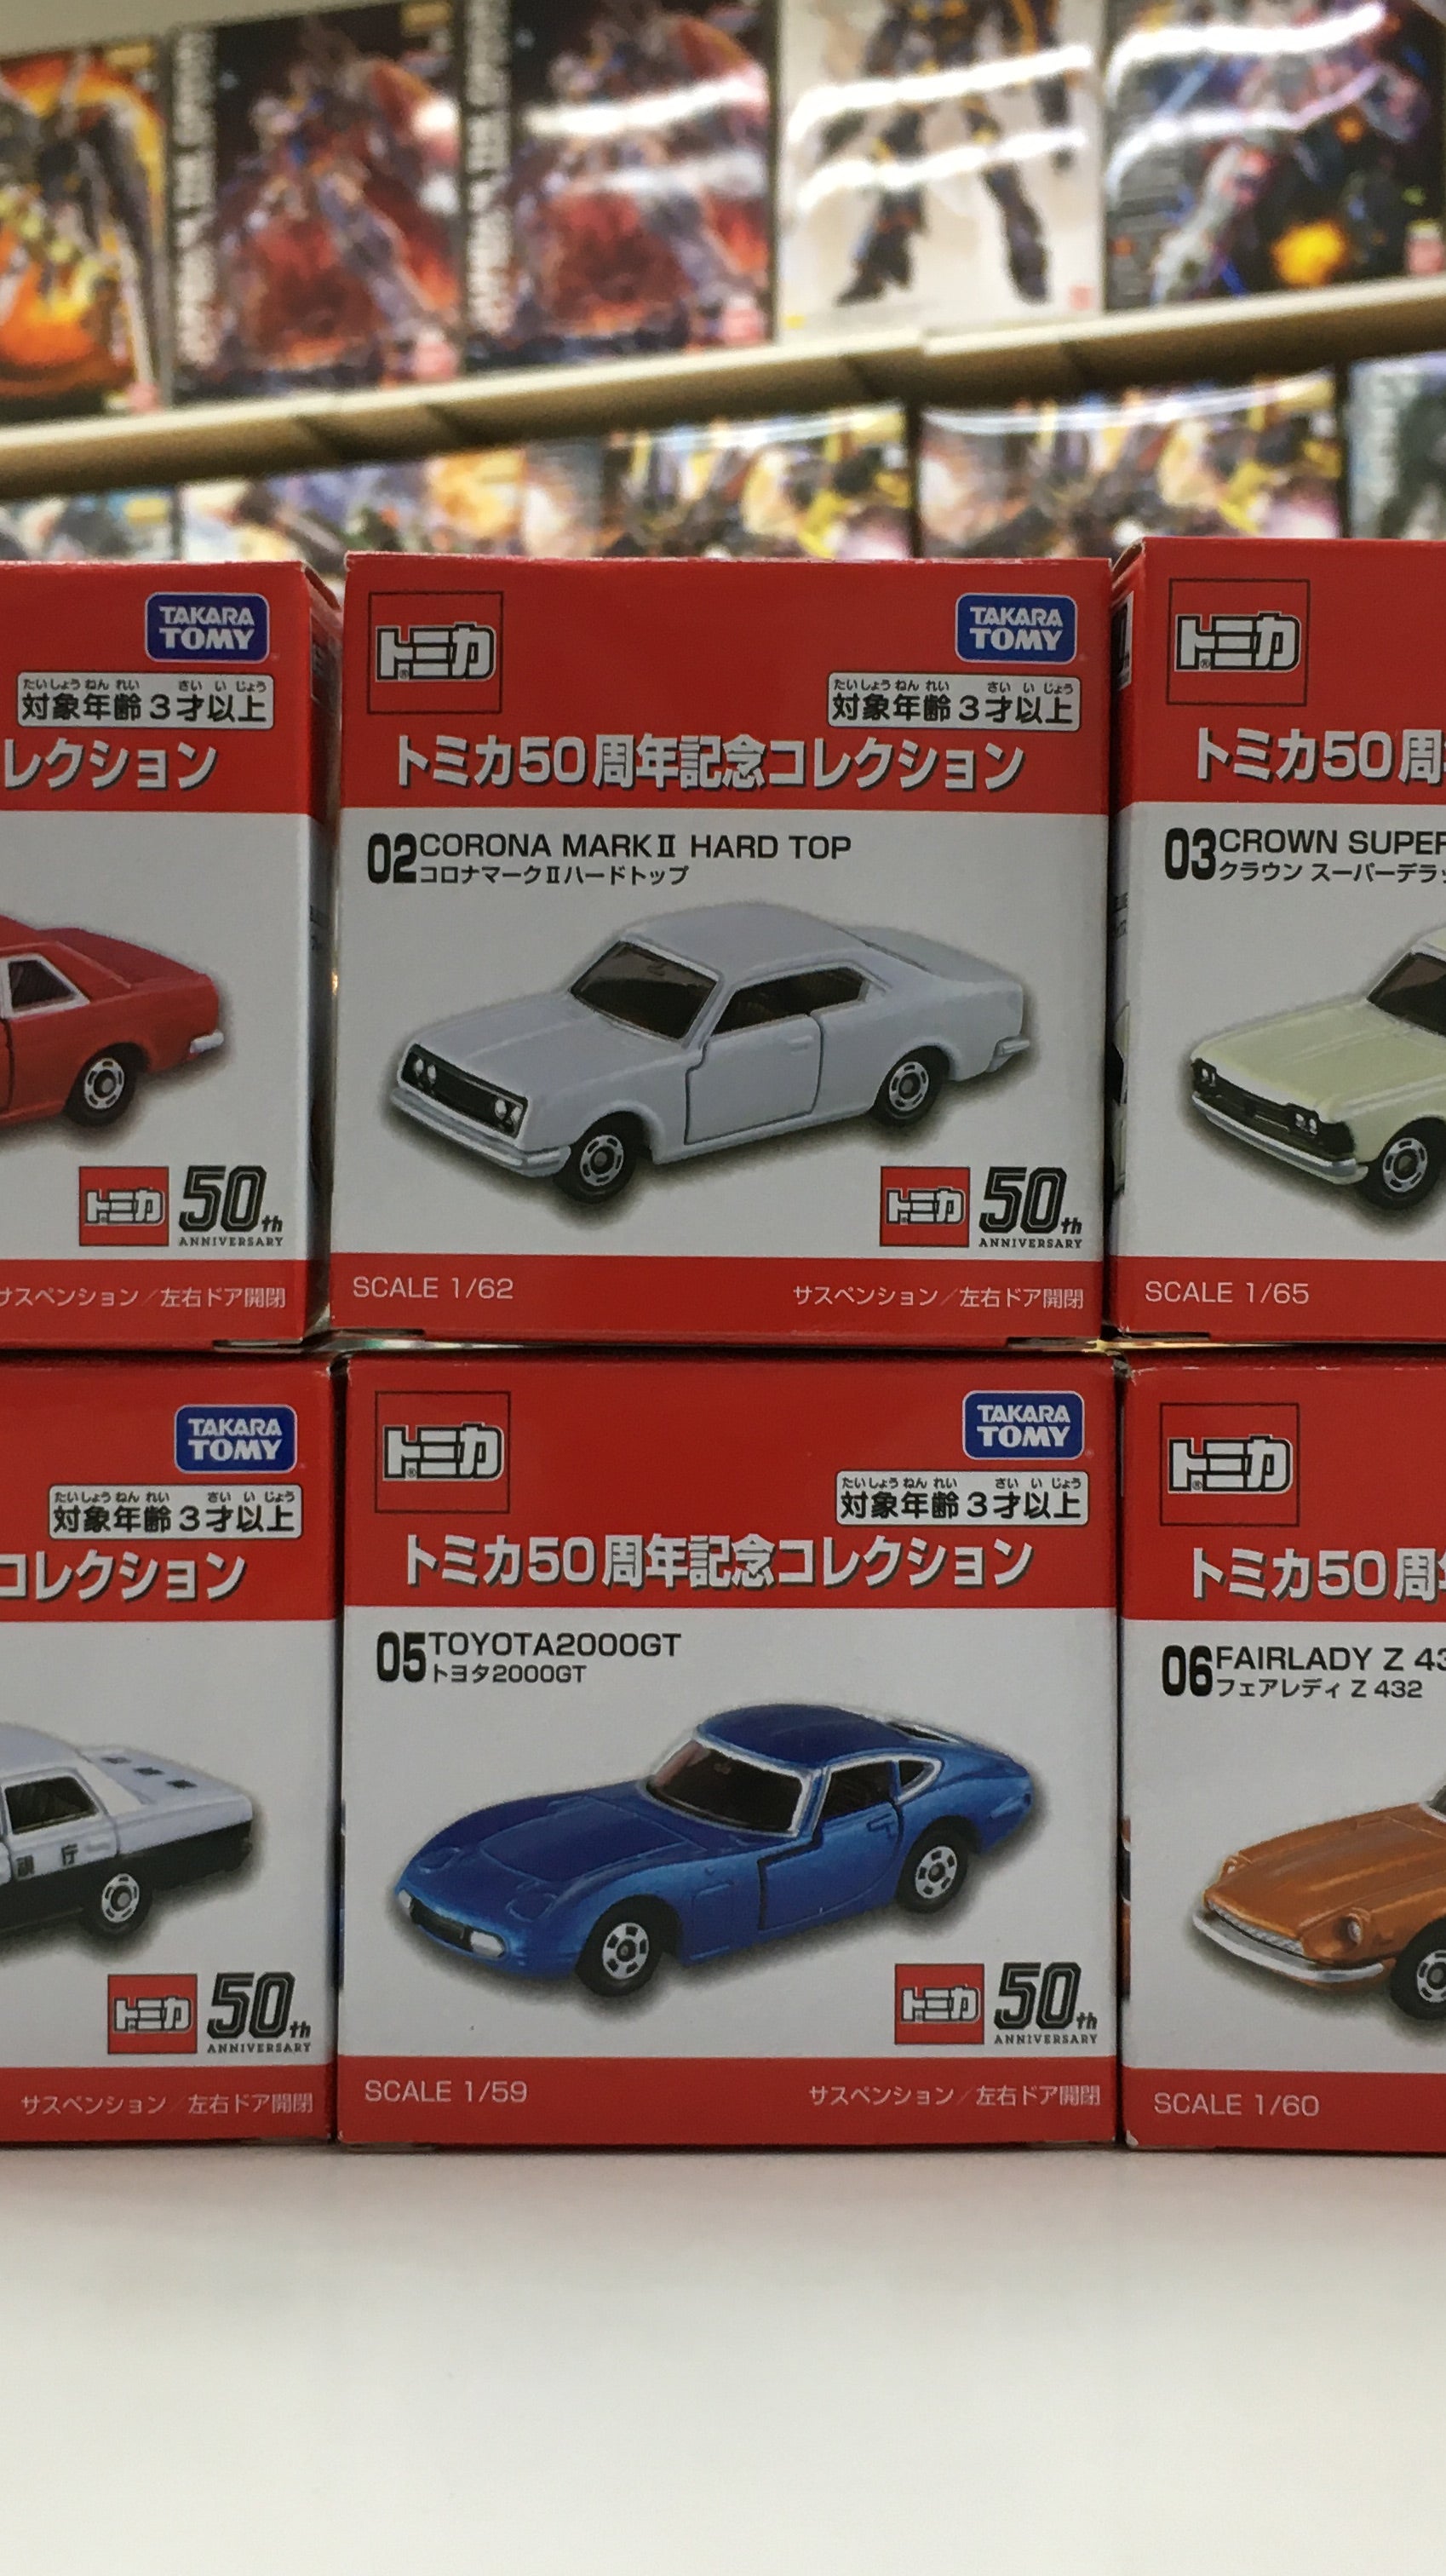 Tomica 50th Anniversary sets